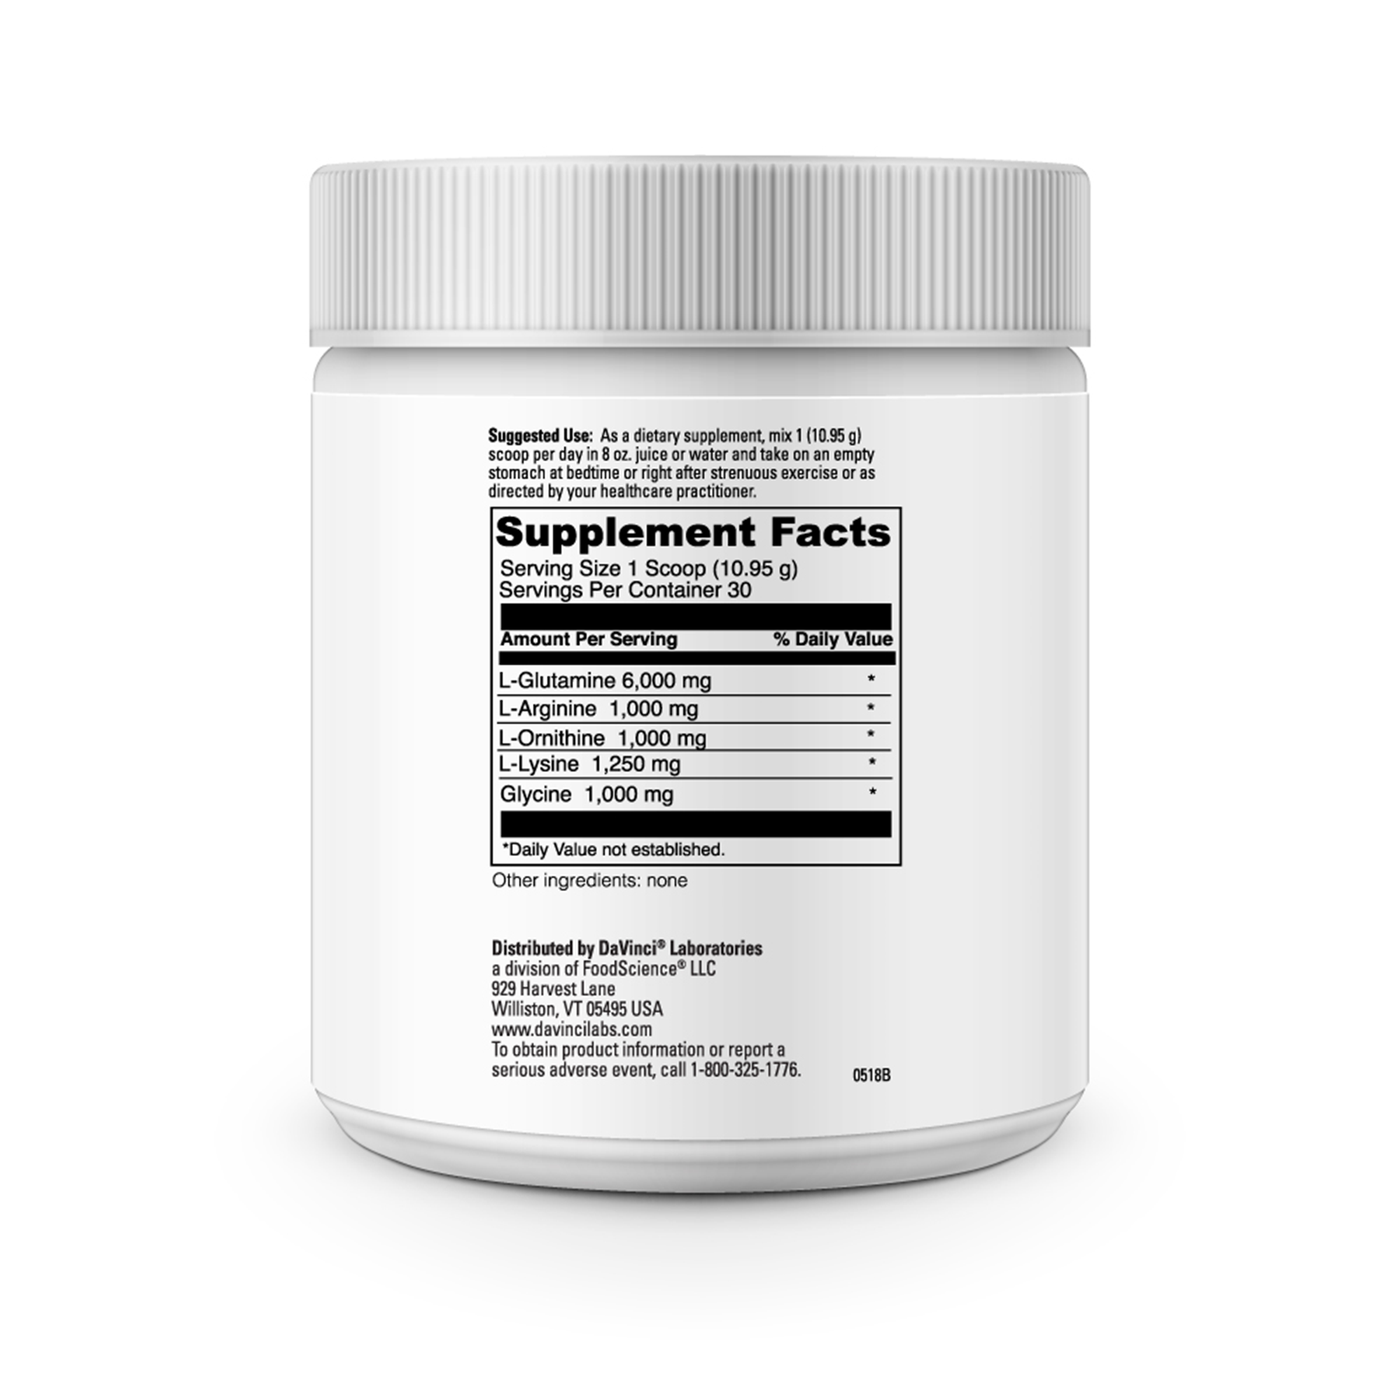 Maxi-HGH 328.5 g Curated Wellness